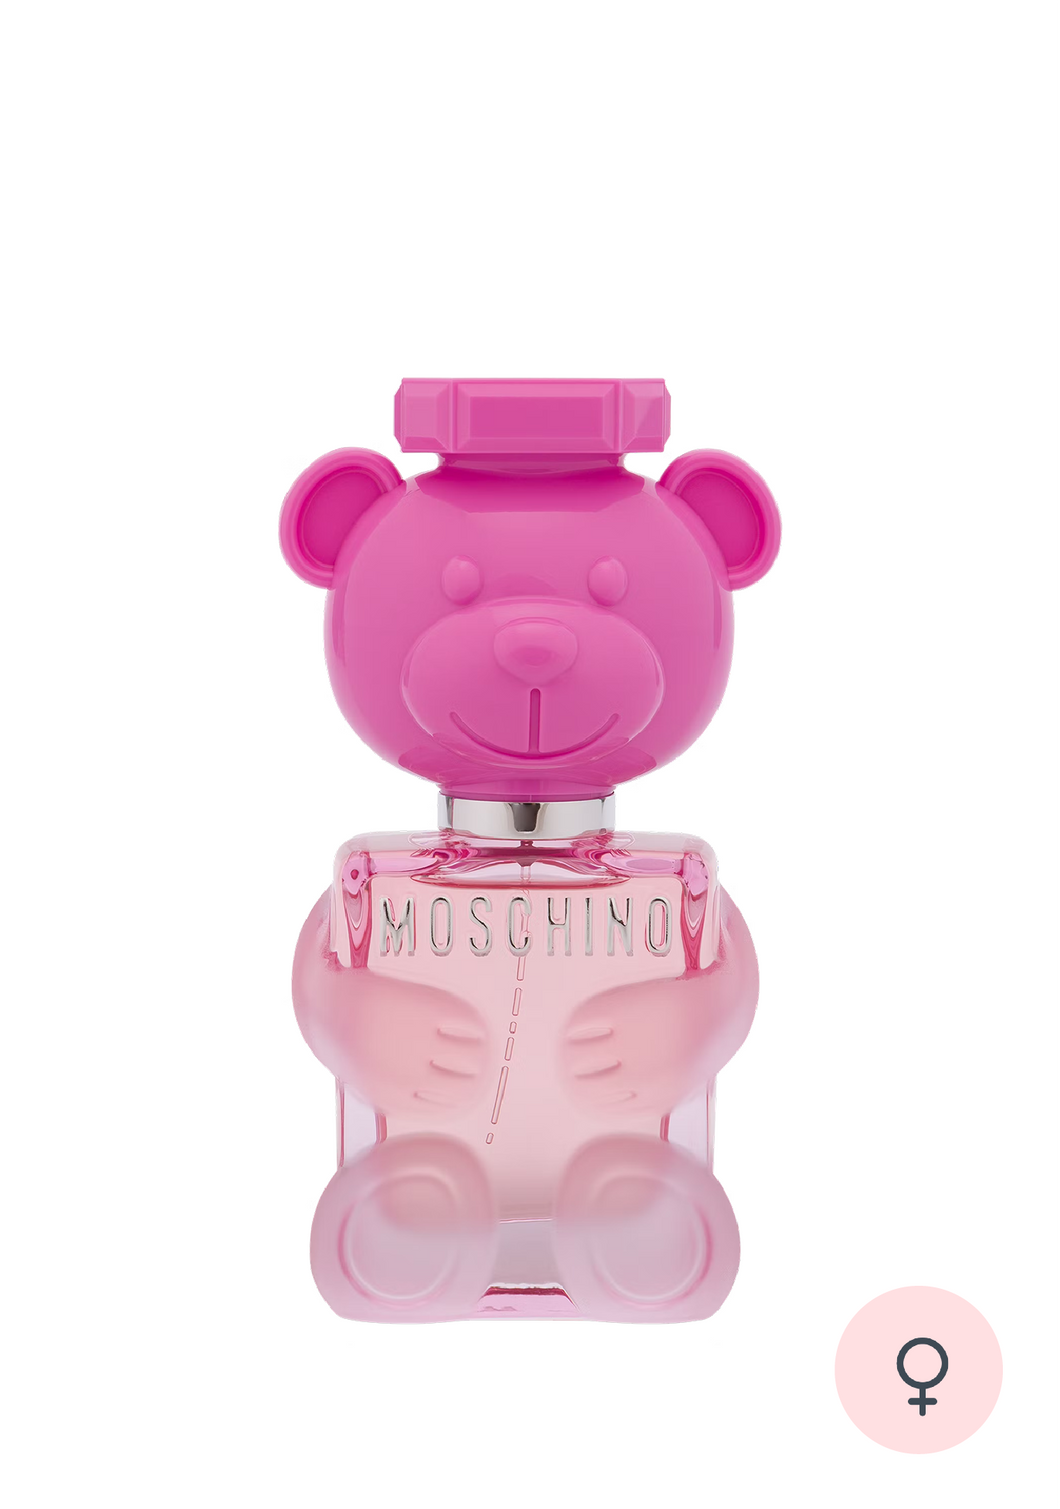 Moschino Toy 2 Bubble Gum EDT